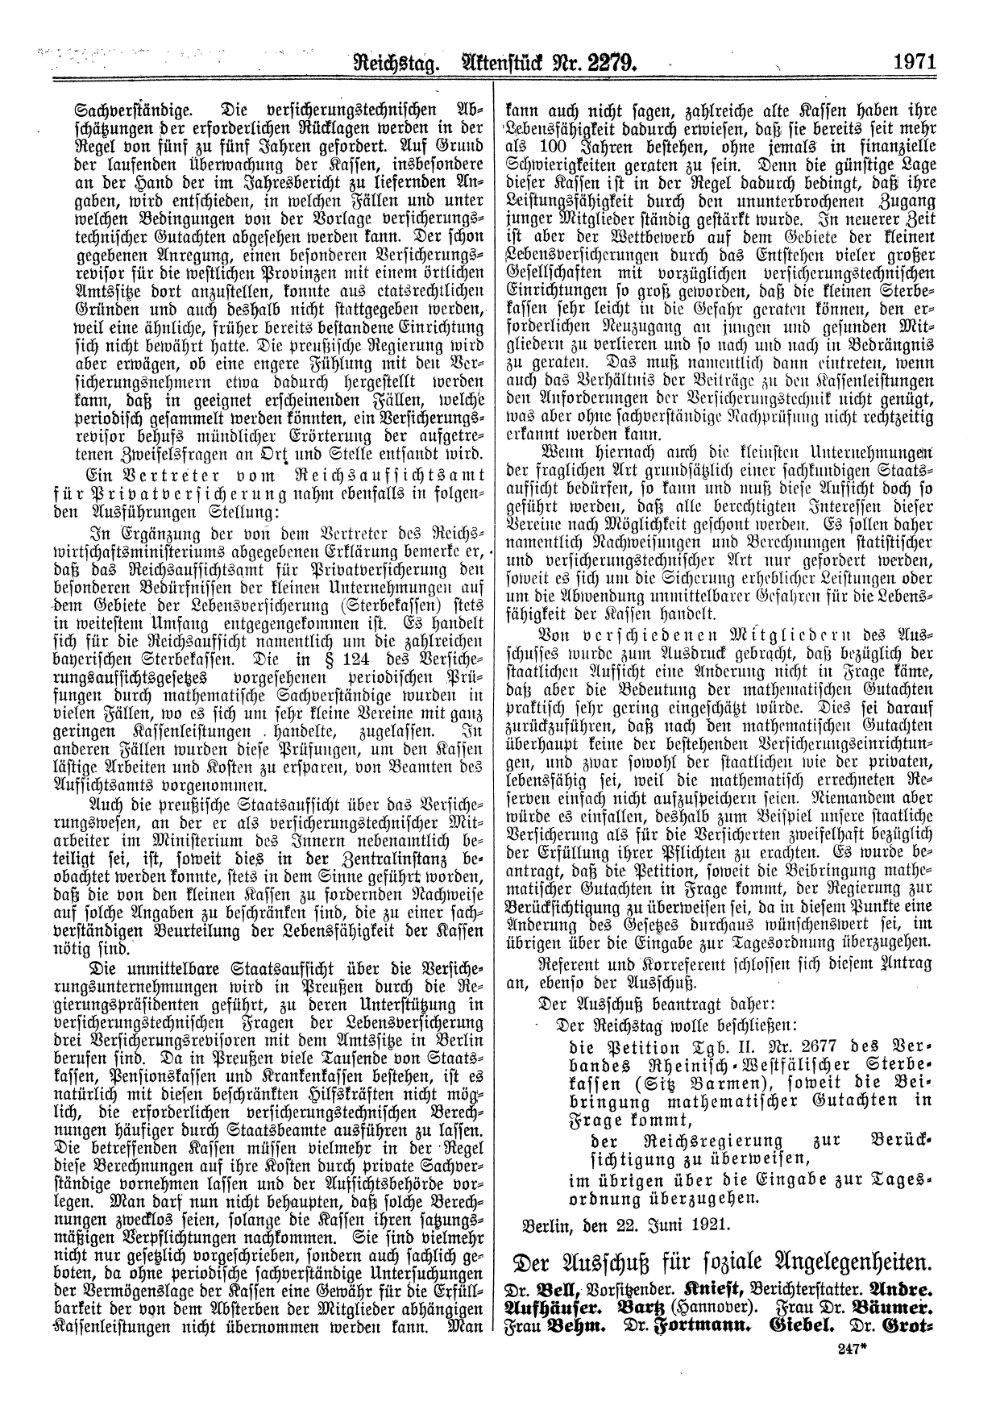 Scan of page 1971